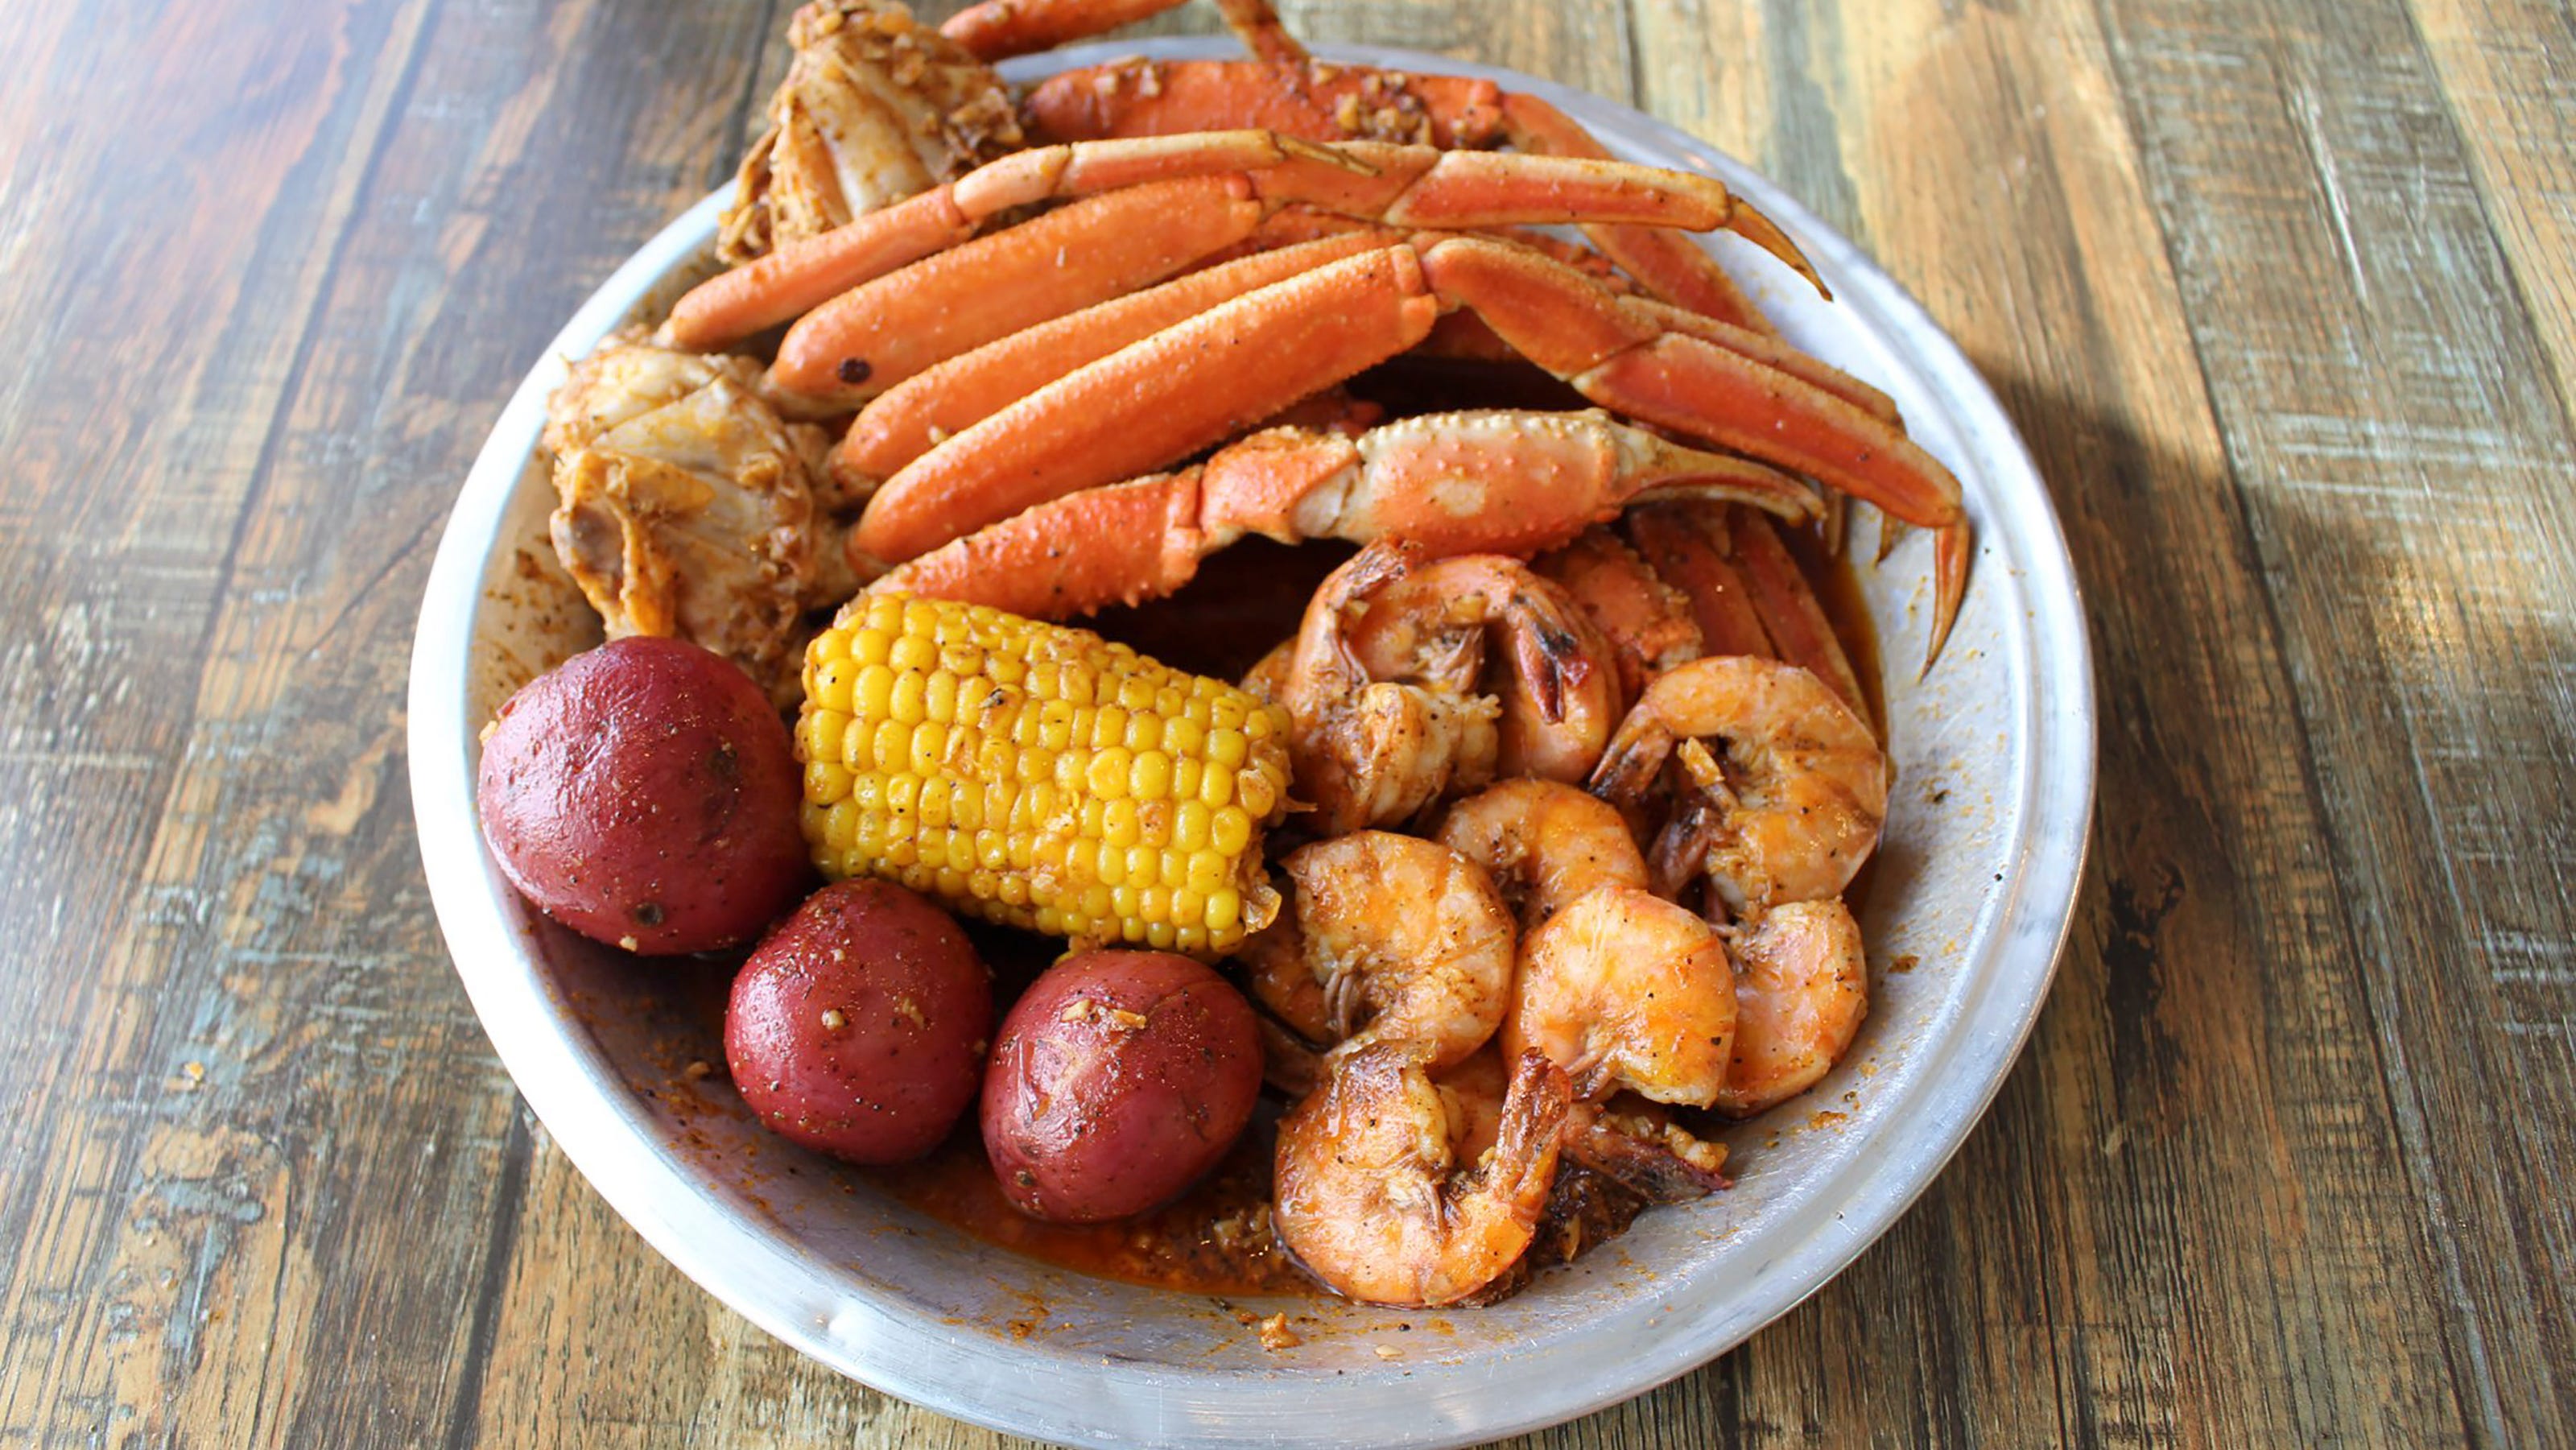 Red Crab offers juicy seafood in Eustis